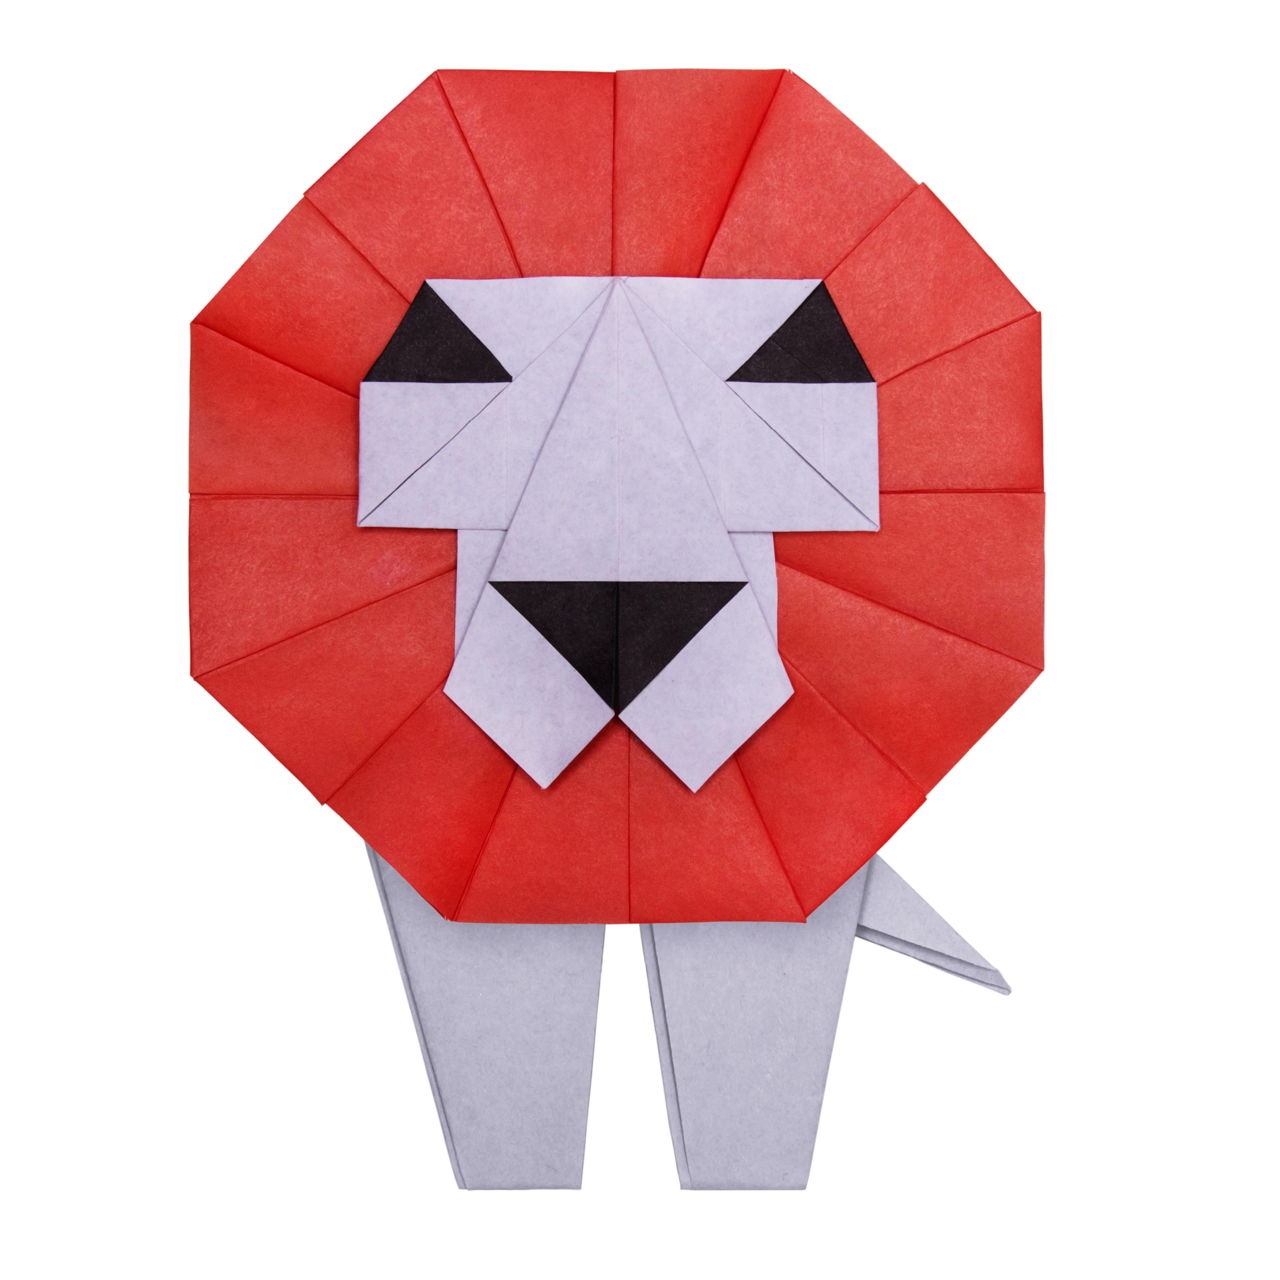 Origami Craft for Kids With Easytofollow Instructions